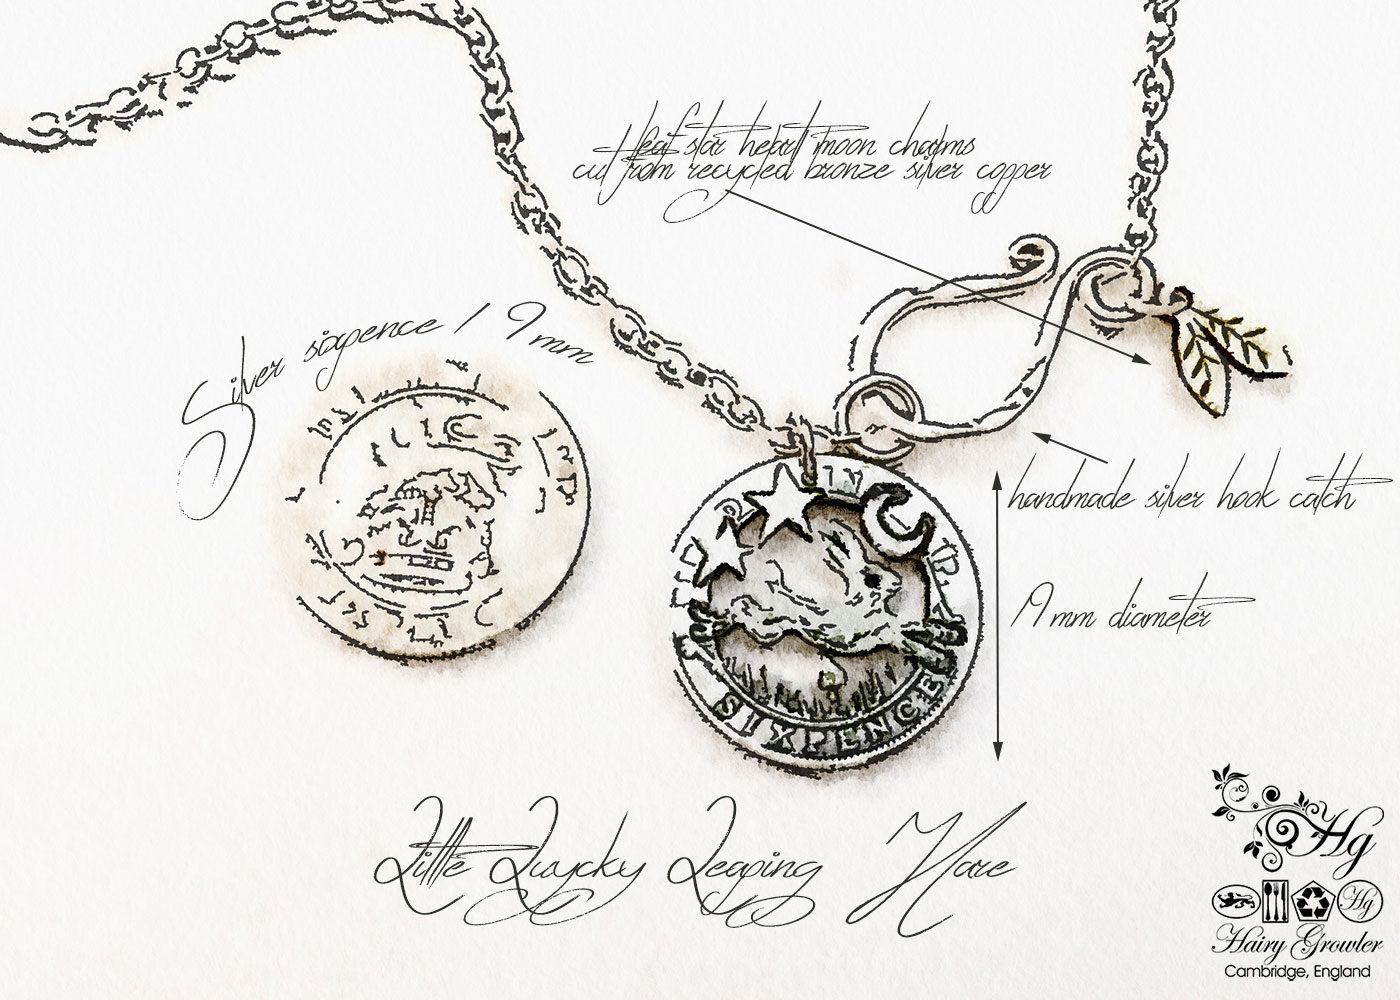 Handmade and upcycled silver sixpence coin leaping hare pendant necklace